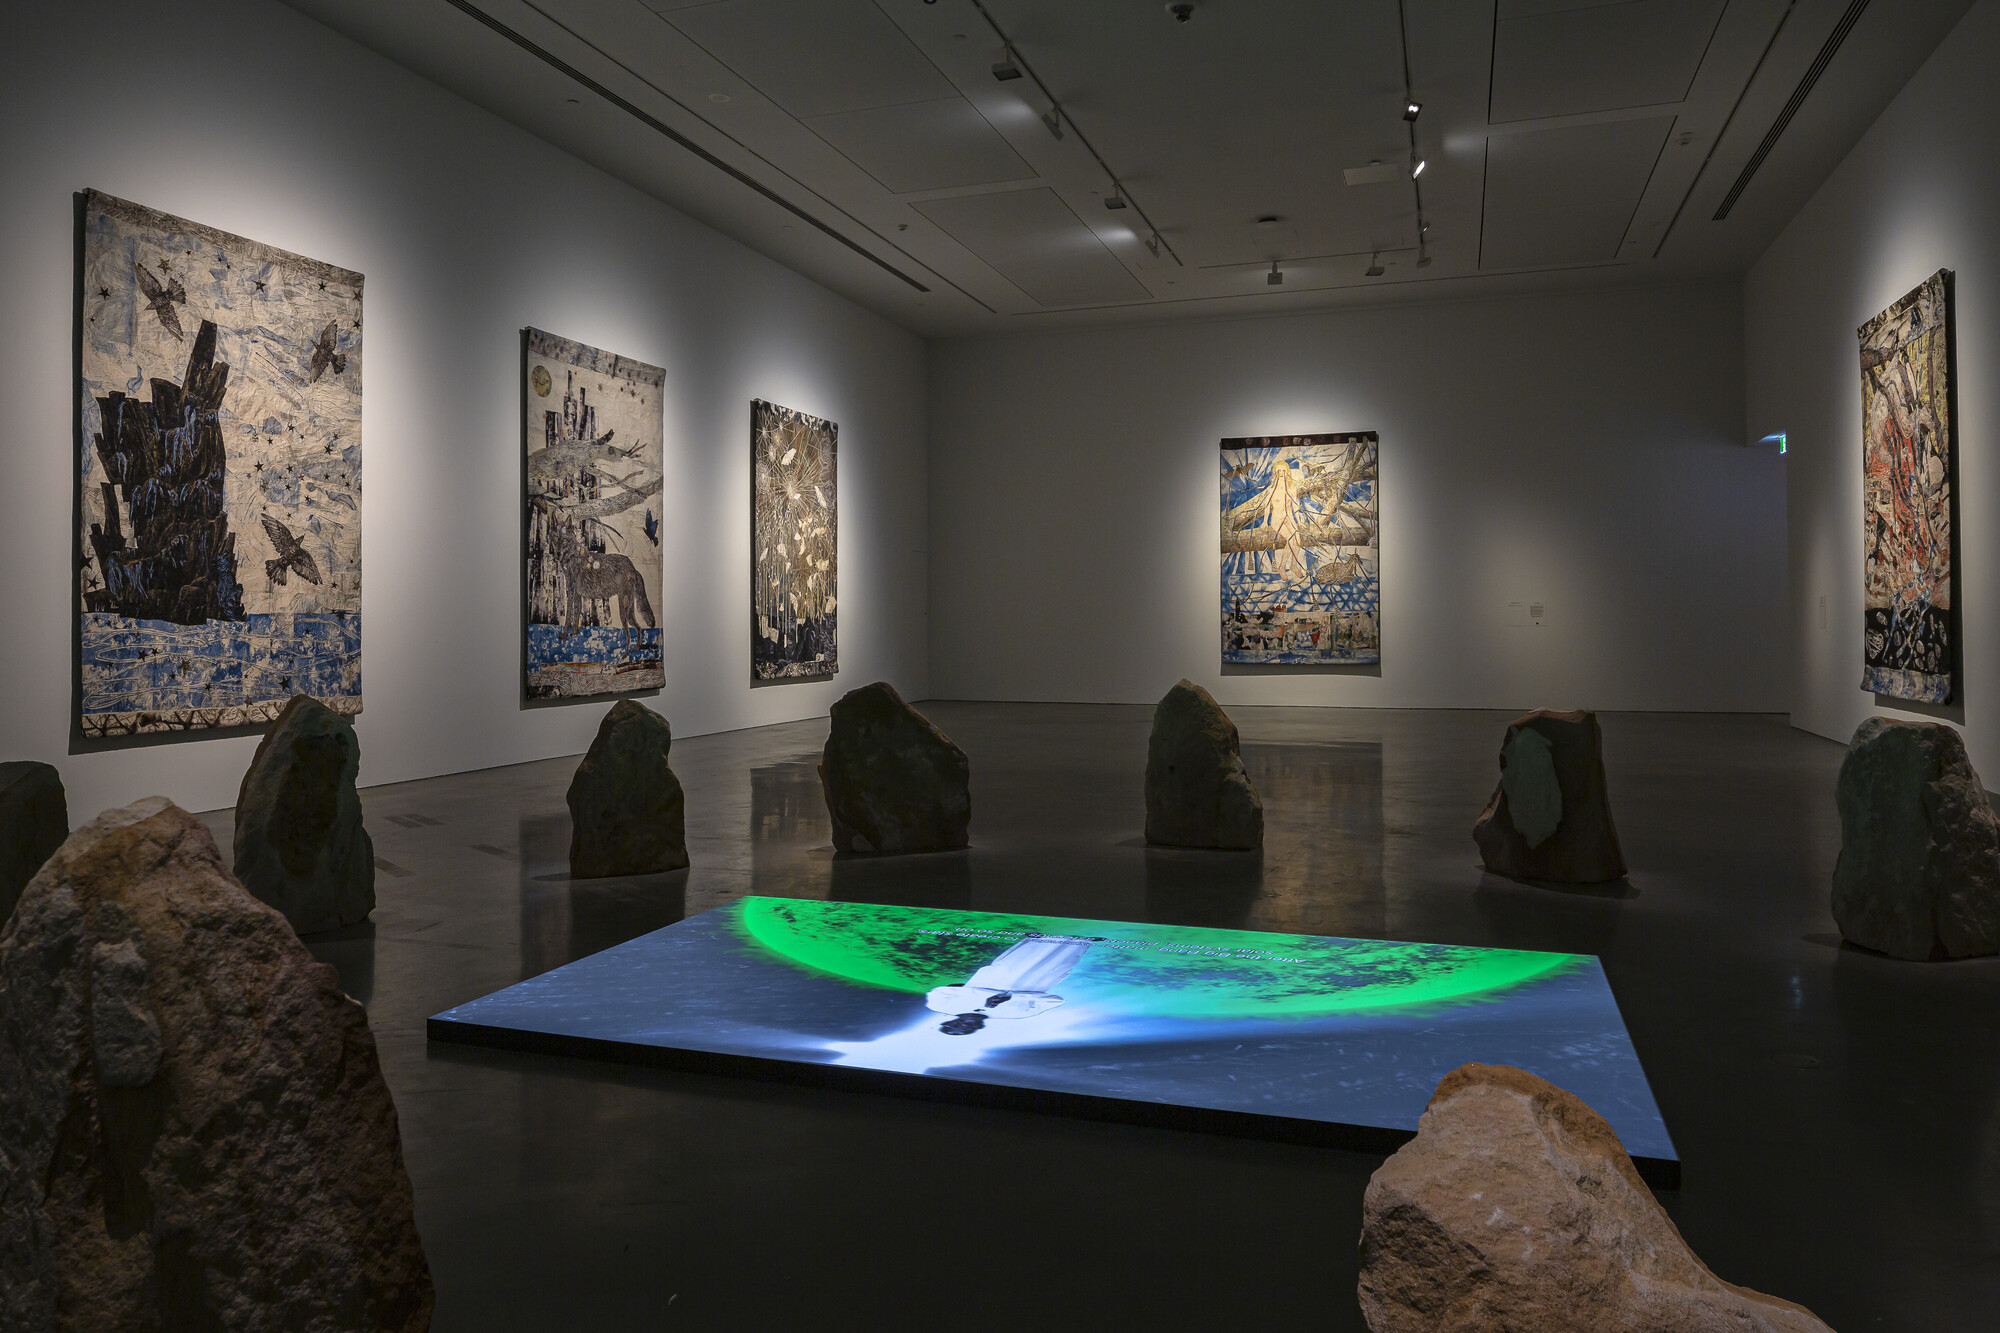 Foreground: Tabita Rezaire, Mamelles Ancestrales, 2019. Presentation at the 23rd Biennale of Sydney was made possible with generous assistance from the Embassy of France in Australia and L’Institut français. Courtesy the artist &amp; Goodman Gallery. Installation view, 23rd Biennale of Sydney, rīvus, 2022, Museum of Contemporary Art Australia. Photography: Document Photography. Background Left to Right: Kiki Smith, Harbor, 2015; Cathedral,2013; Spinners, 2014; Congregation, 2014; and Underground, 2012.  Presentation at the 23rd Biennale of Sydney was made possible with generous support from Goethe-Institut Australia. Courtesy of the artist &amp; Pace Gallery.